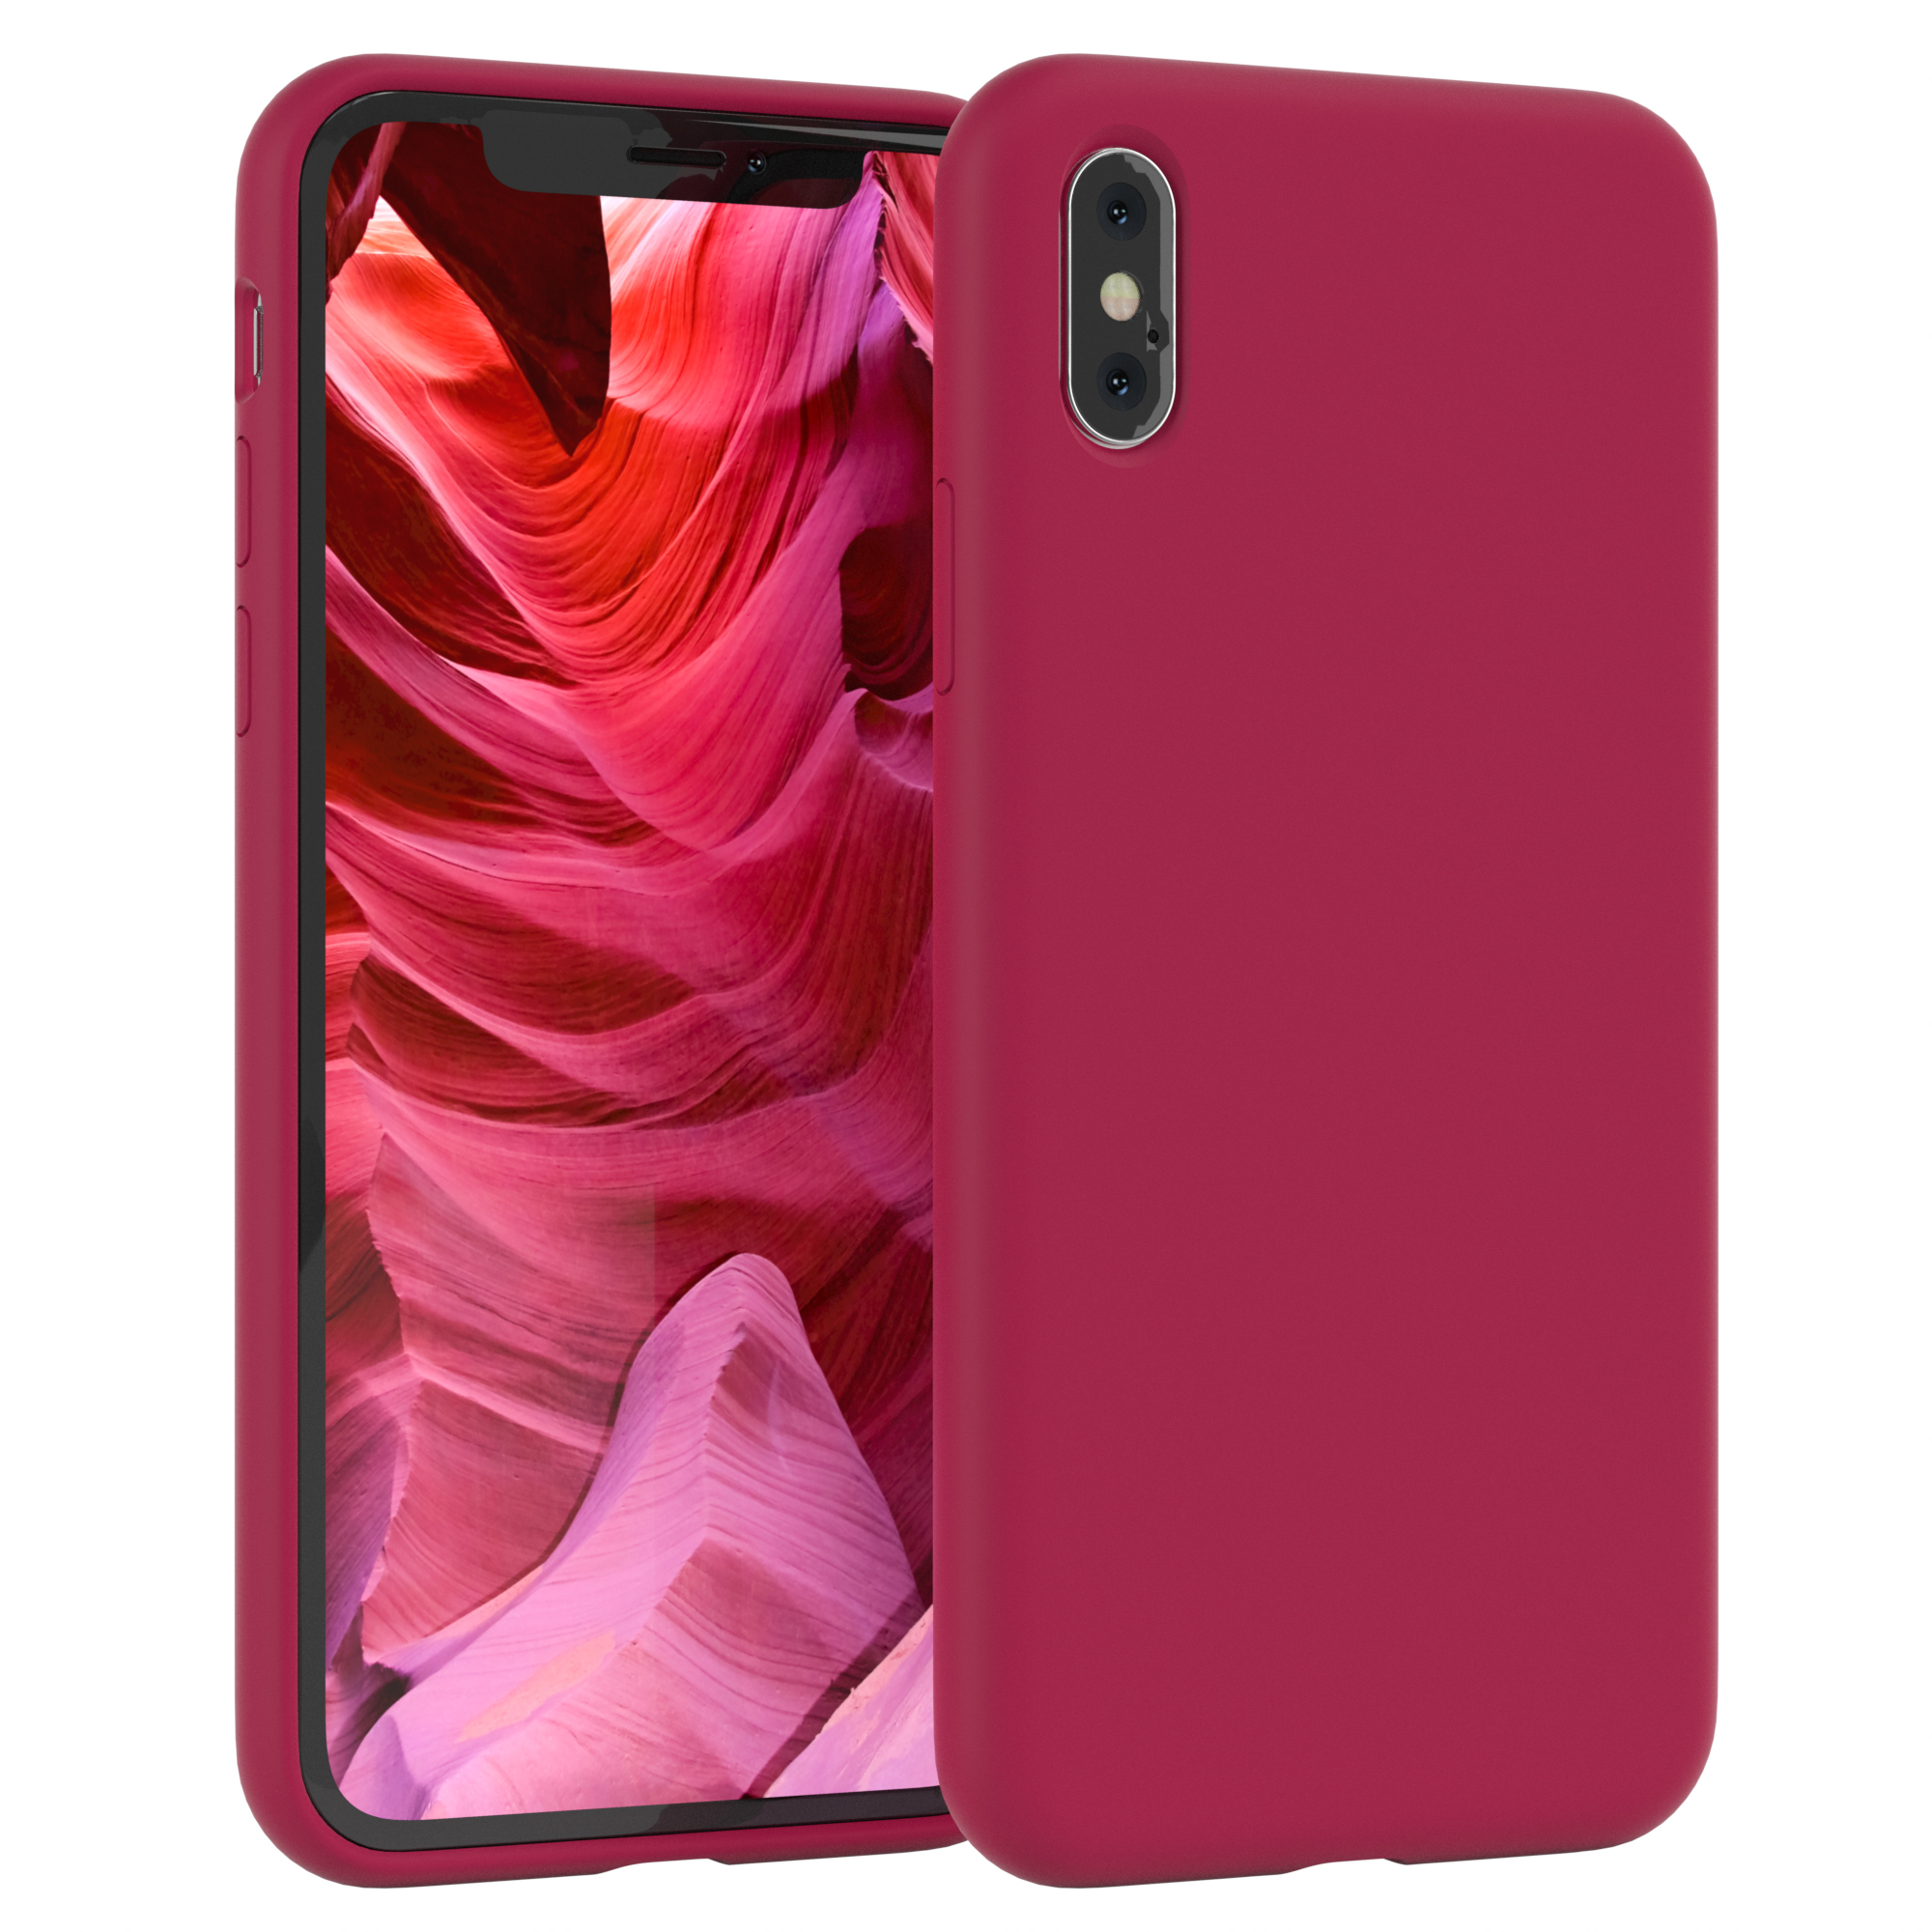 EAZY CASE iPhone Silikon Apple, XS Rot Premium / Handycase, Max, Beere Backcover